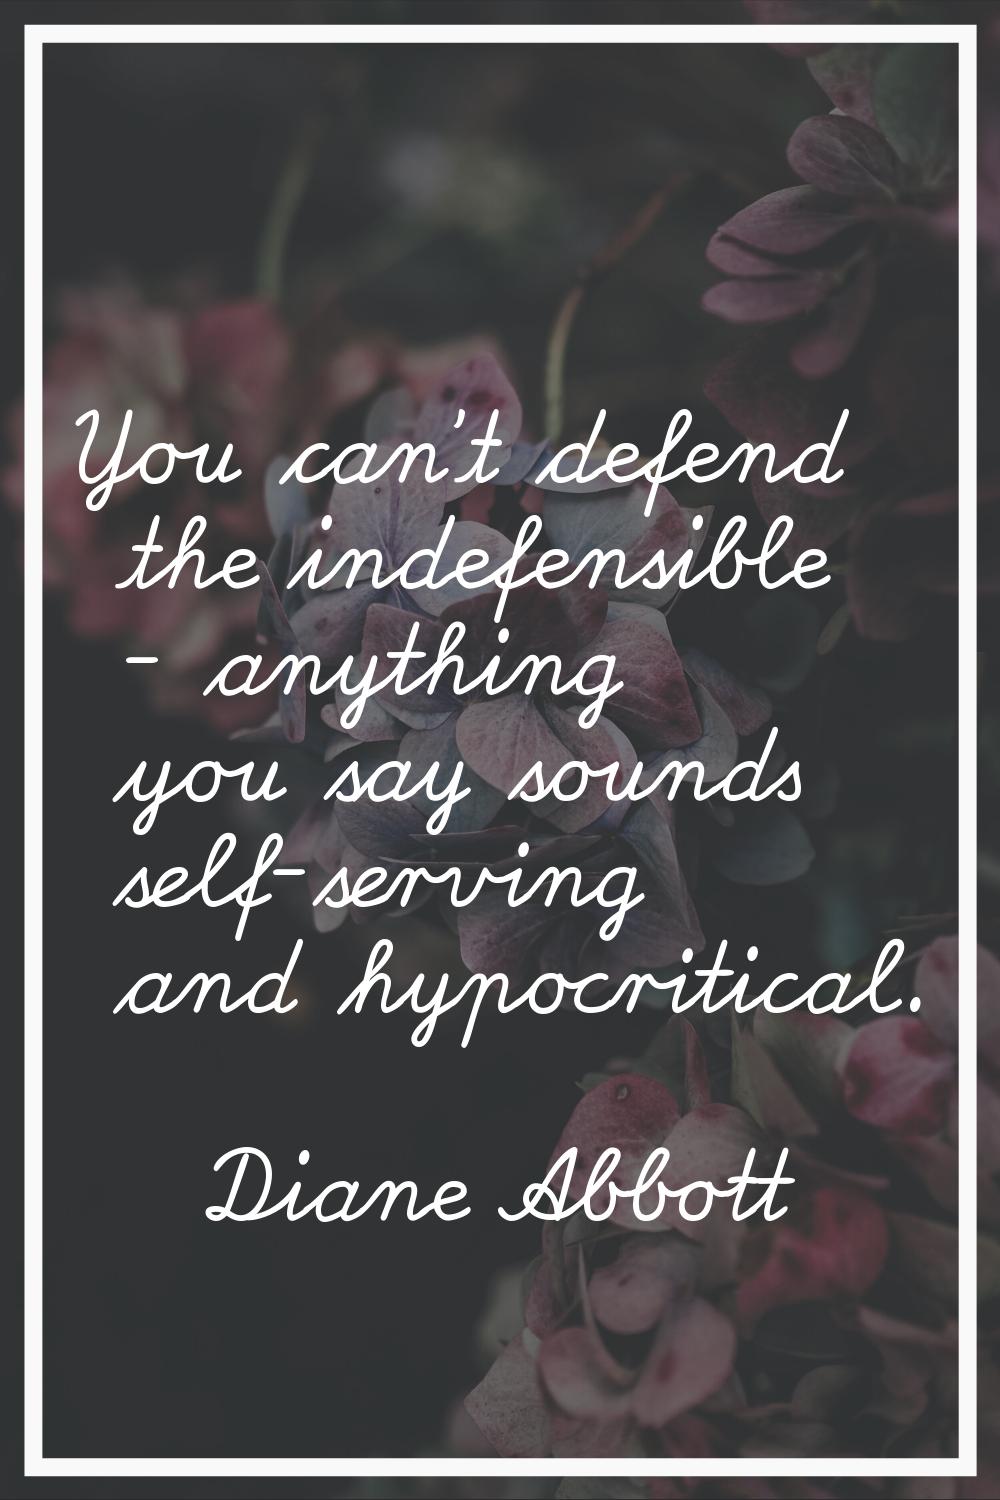 You can't defend the indefensible - anything you say sounds self-serving and hypocritical.